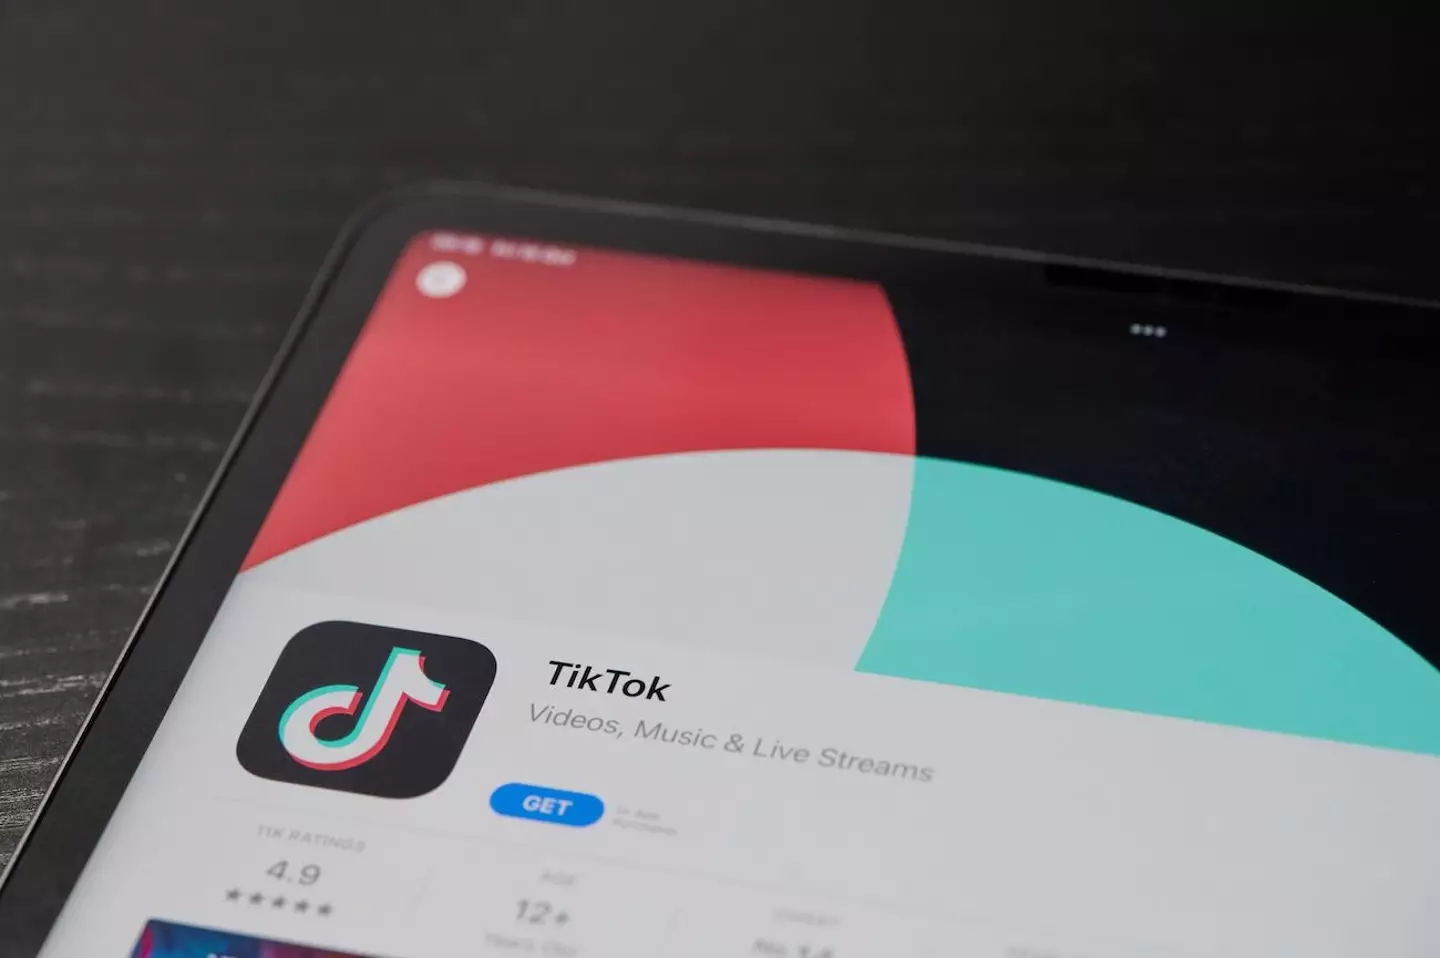 Apple and Google have been urged by the FCC (Federal Communications Commission) to remove TikTok from their respective app stores over a ‘national security risk’.